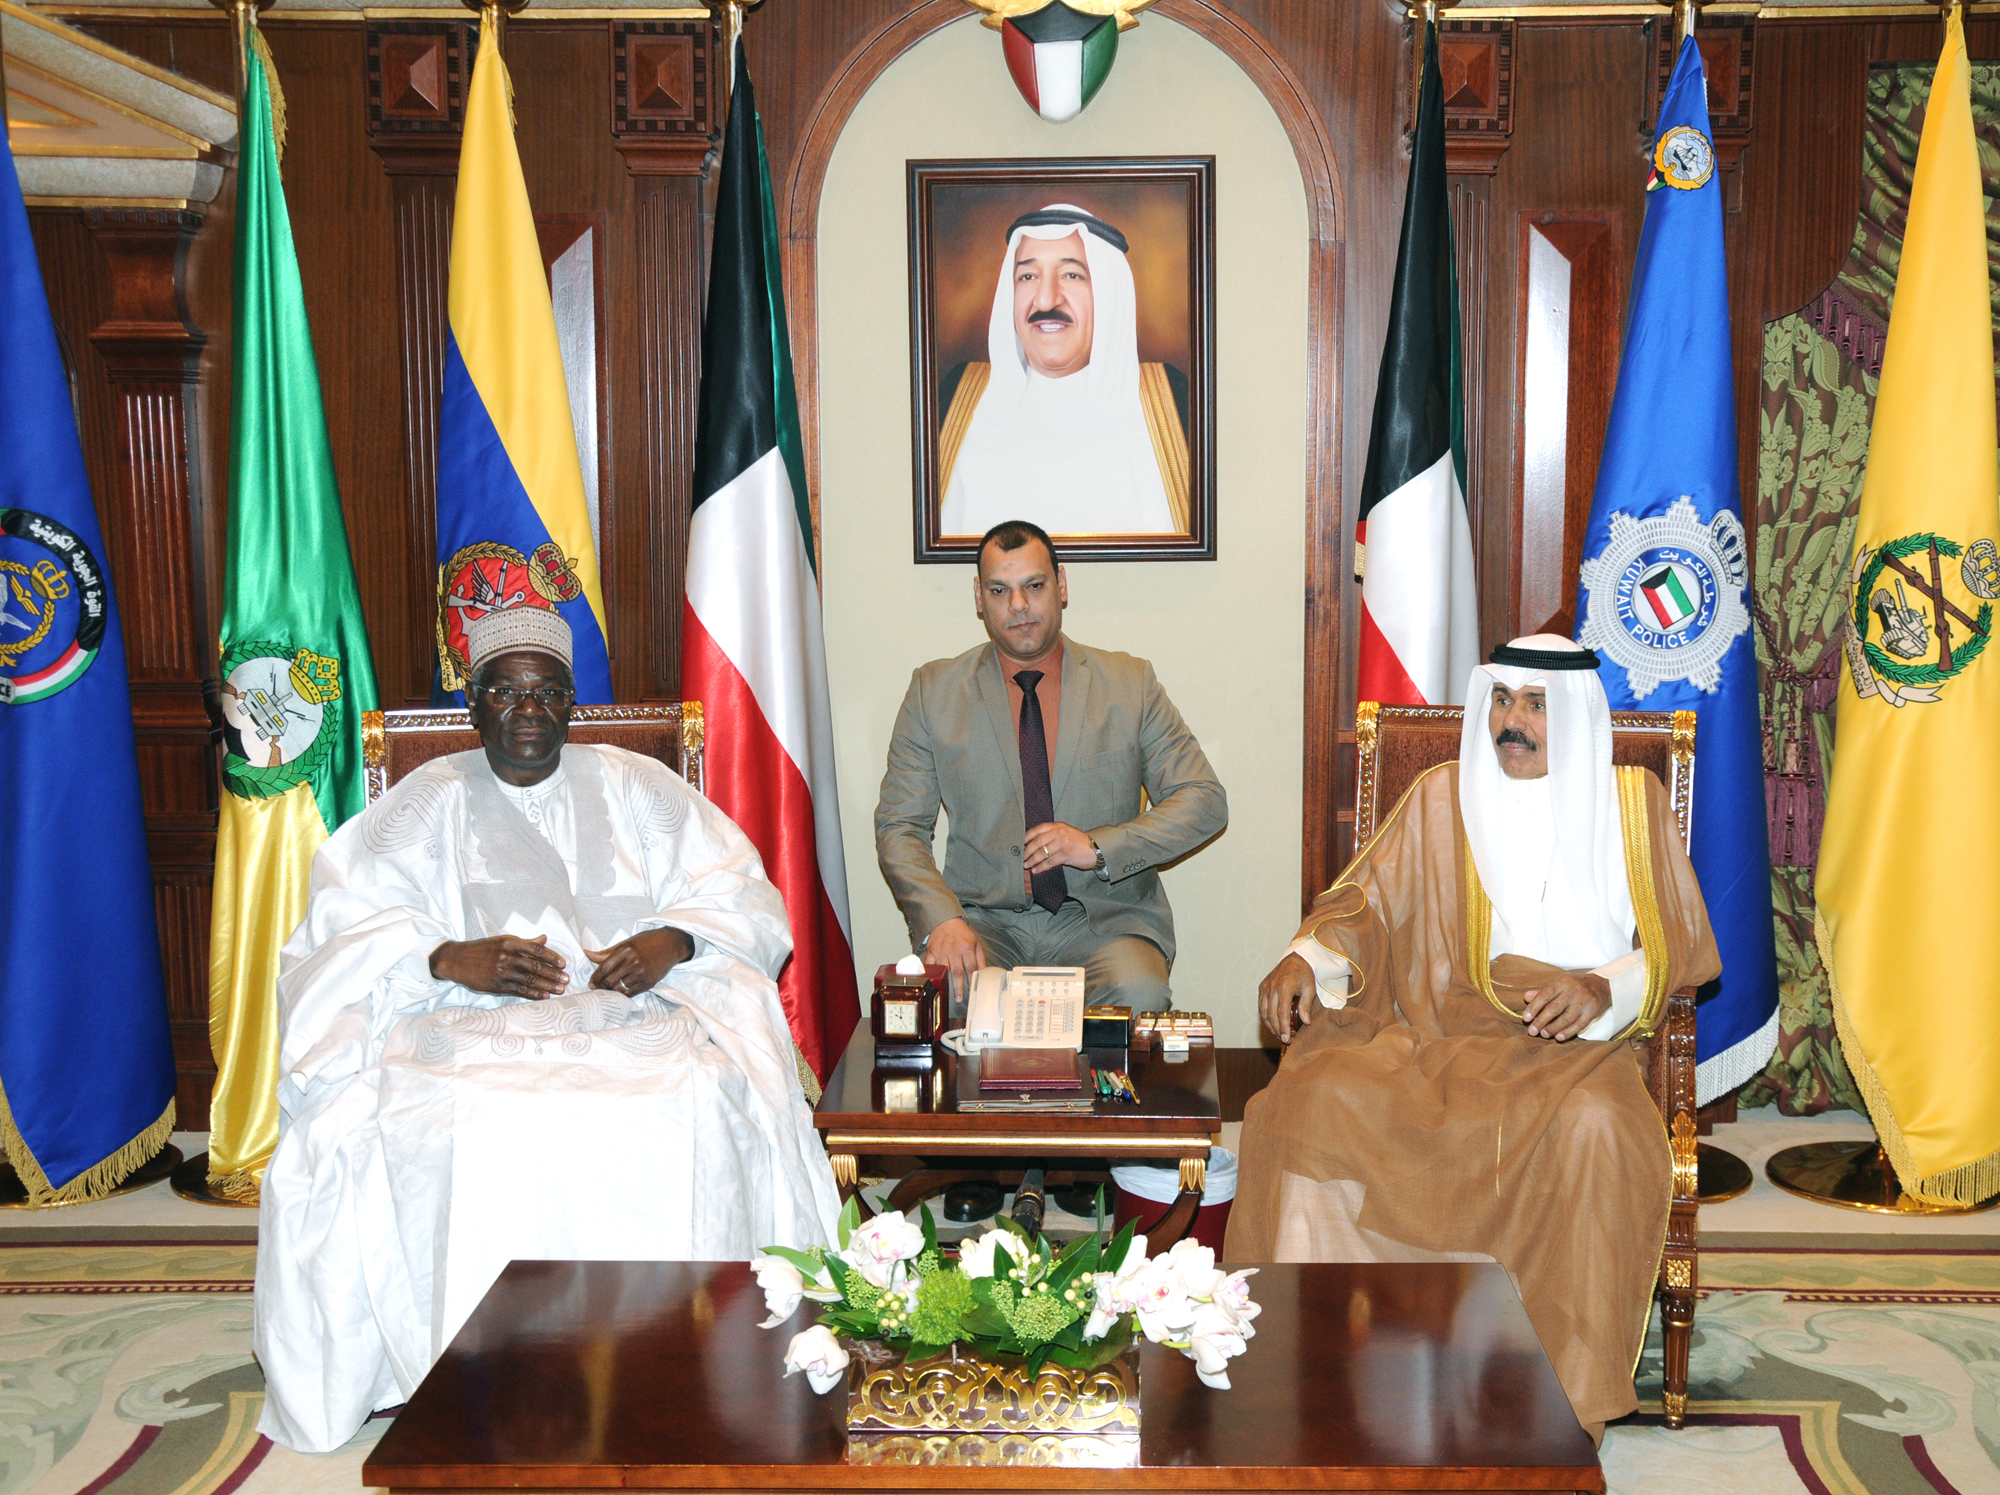 His Highness the Crown Prince Sheikh Nawaf Al-Ahmad Al-Jaber Al-Sabah received Tuesday at Bayan Palace newly appointed Ambassador of the Republic of Benin to the country